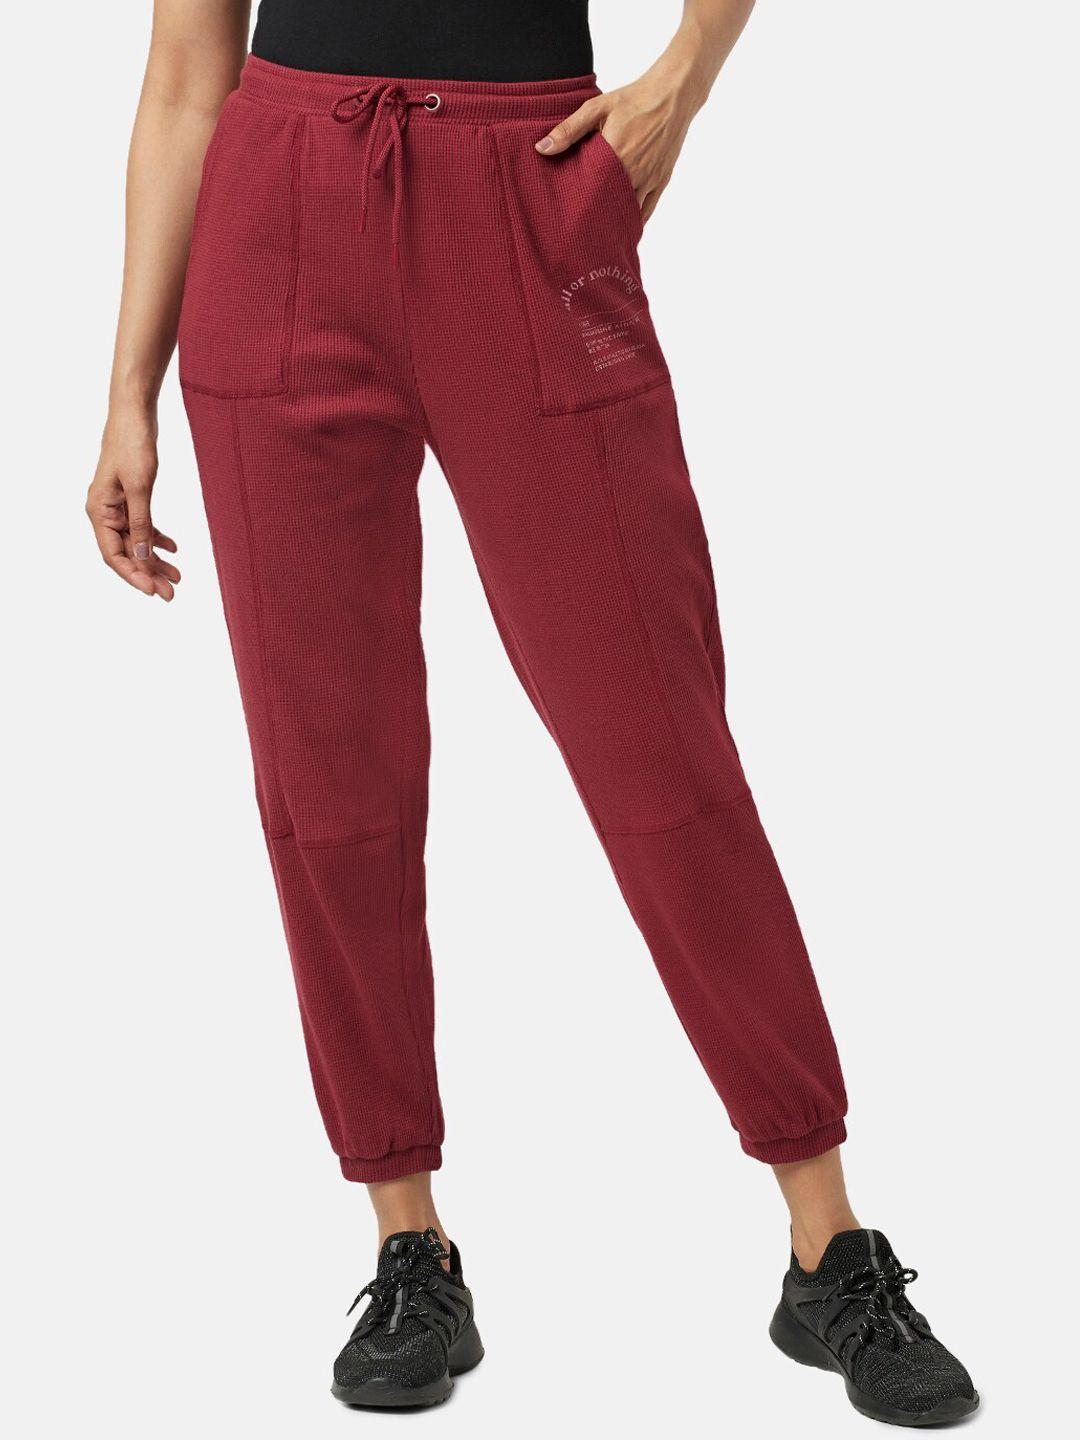 ajile-by-pantaloons-women-relaxed-fit-cotton-joggerstrack-pants